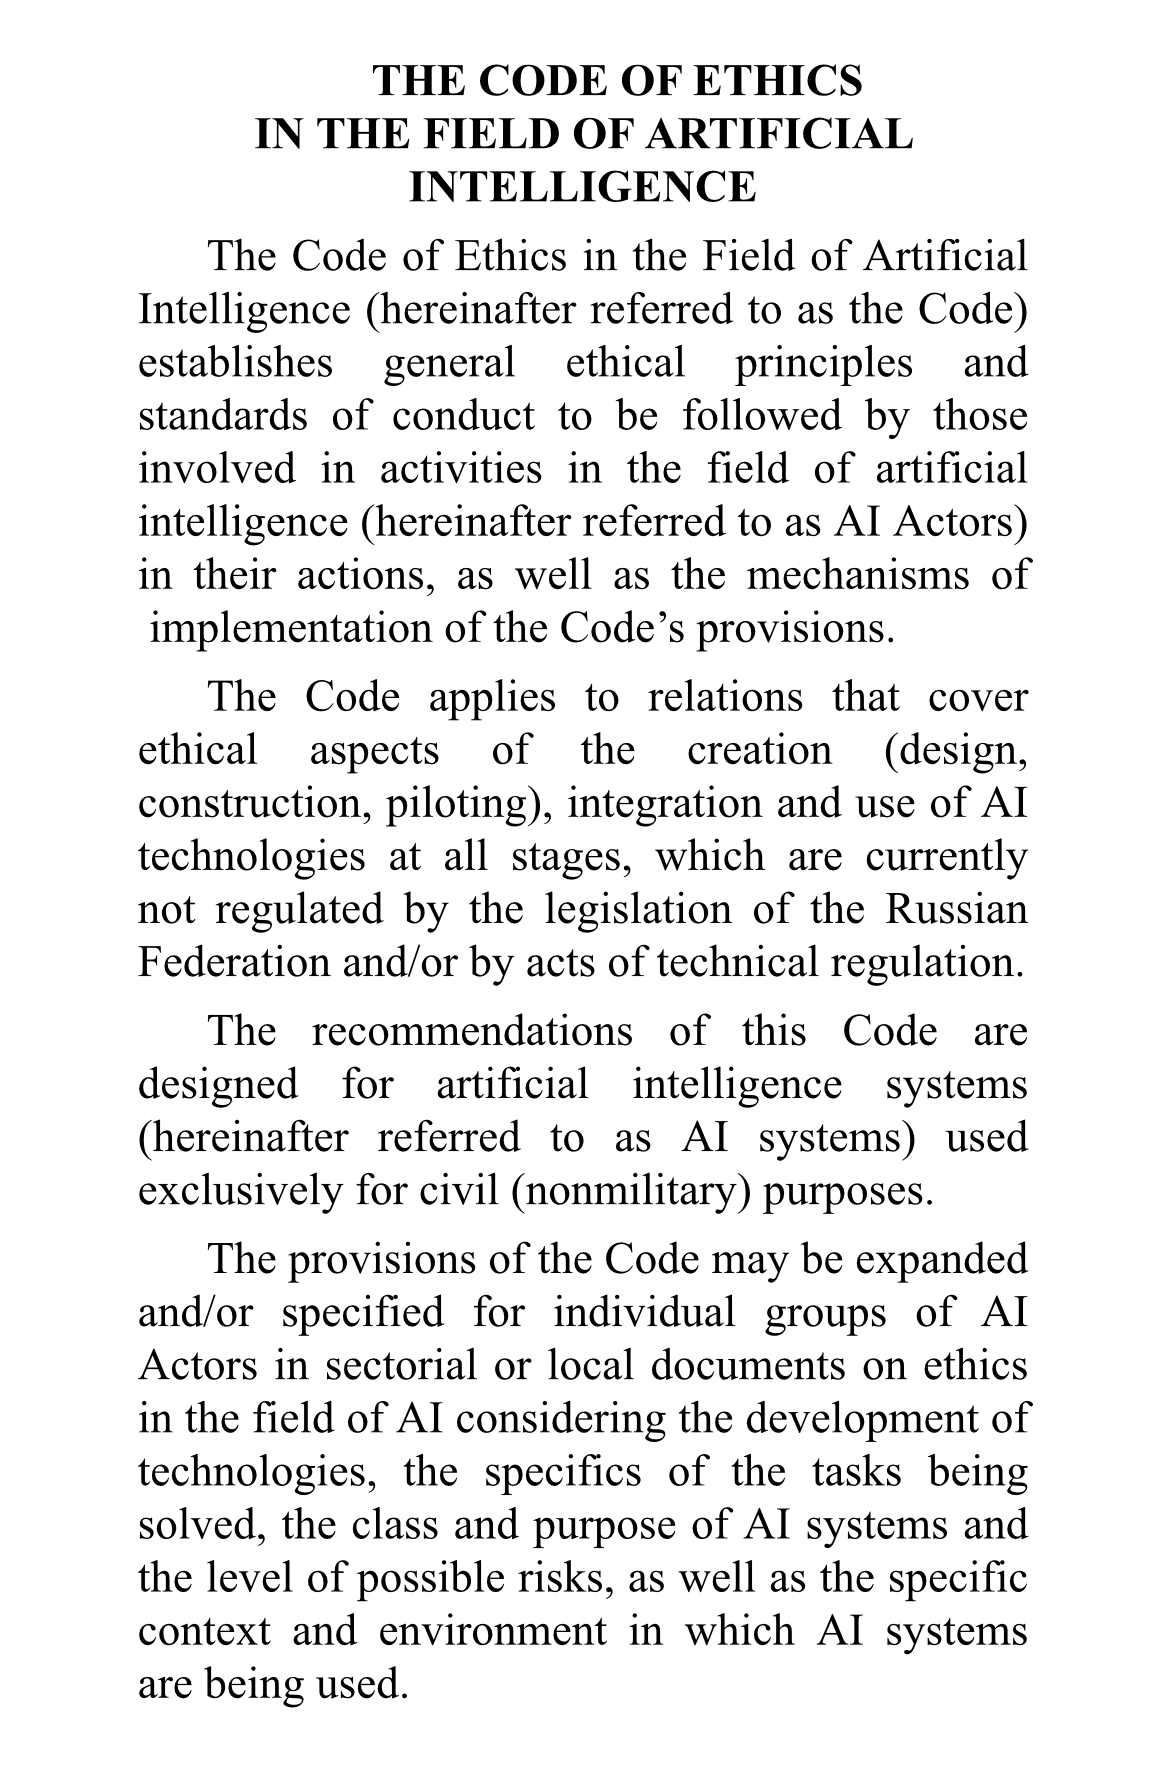 The Code of Ethics in the Field of Artificial Intelligence